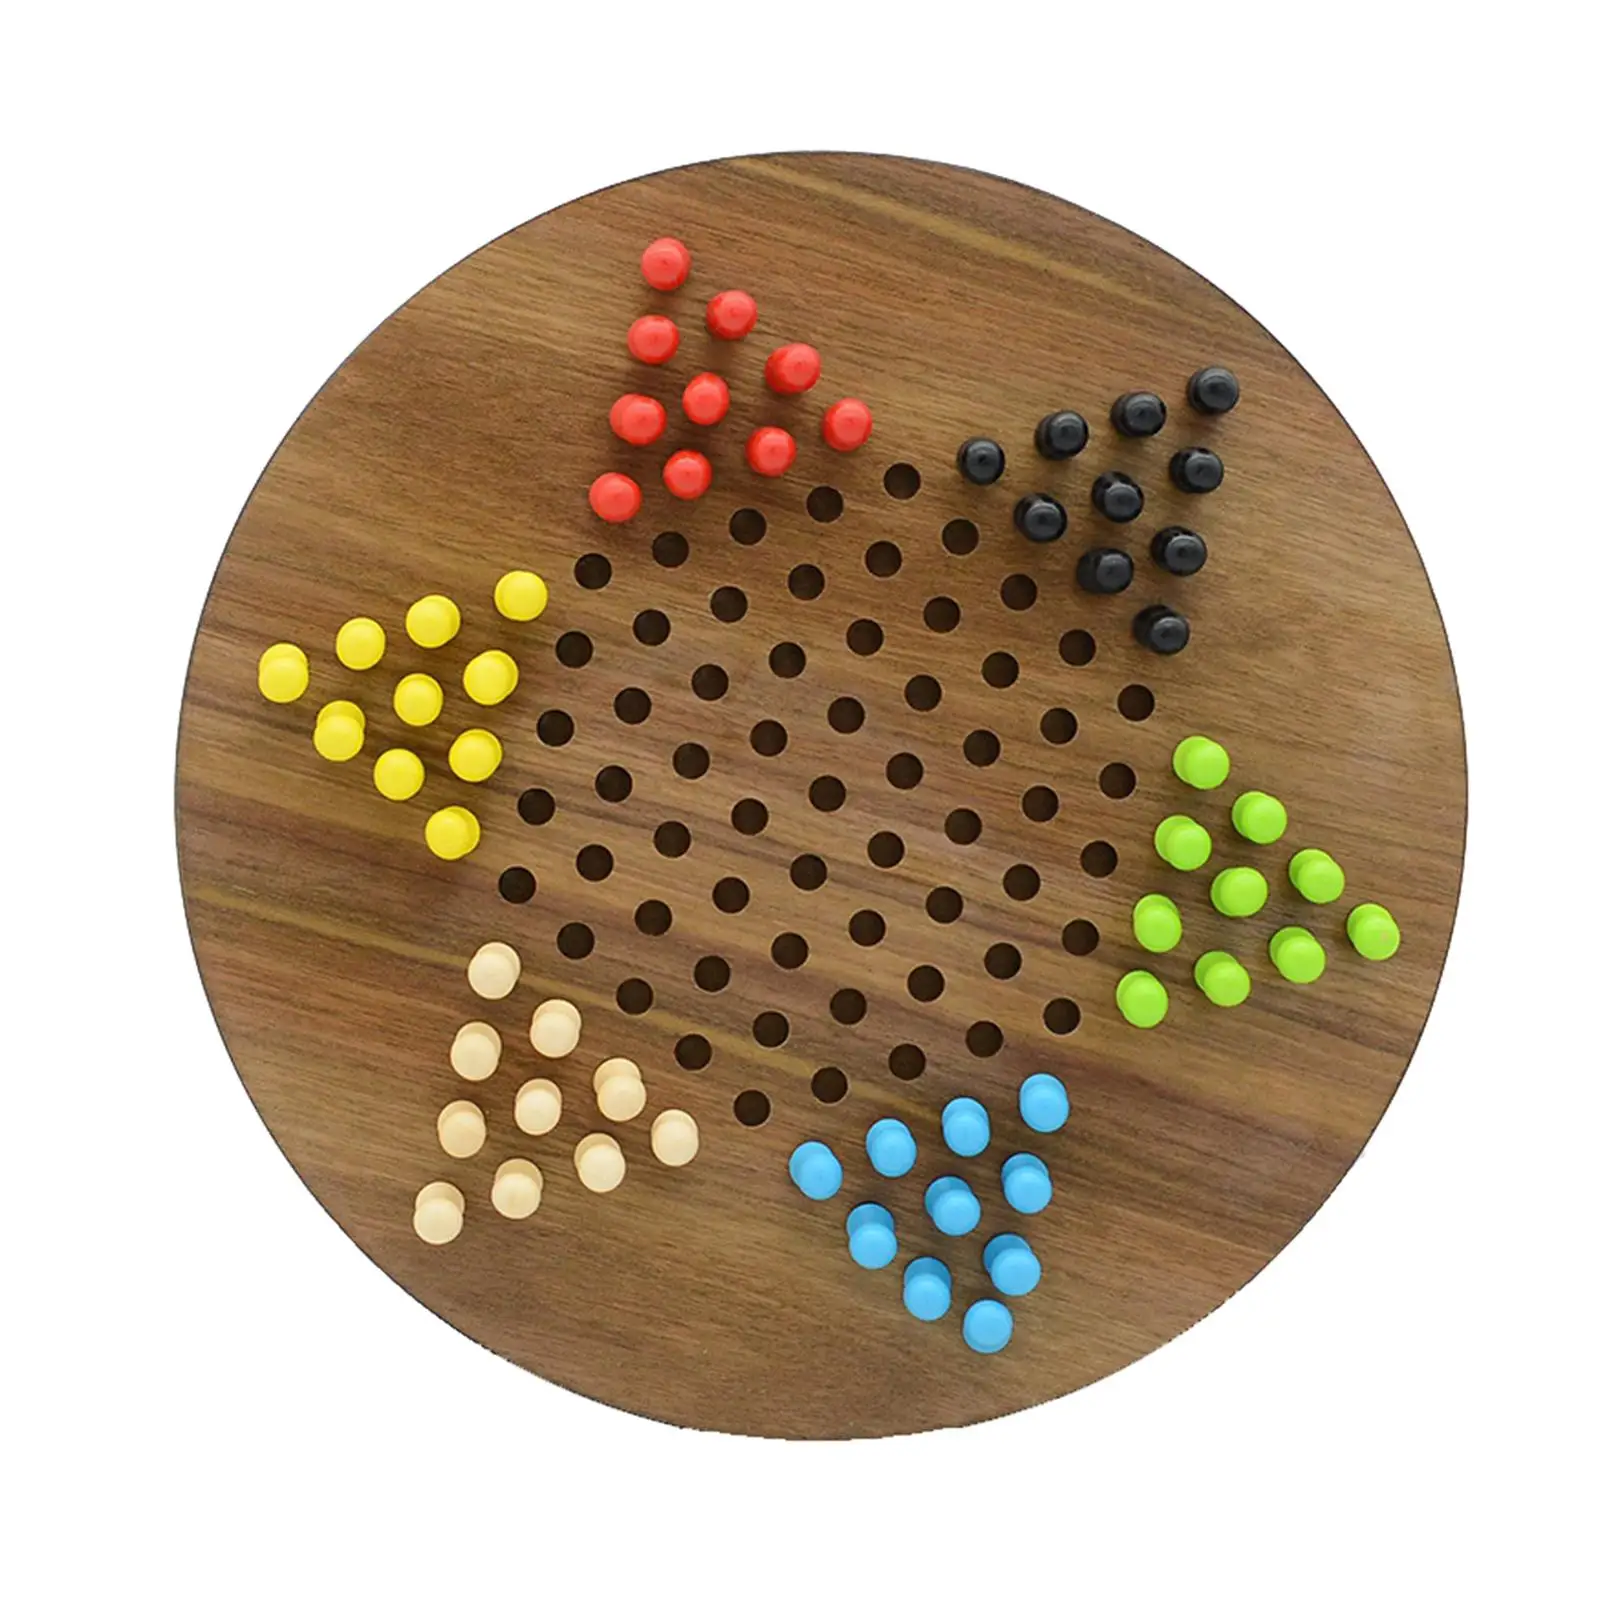 Portable Chinese Checkers Game Preschool Learning Activities Toy Natural Chinese Checkers with Marbles for Children Toddler Kids